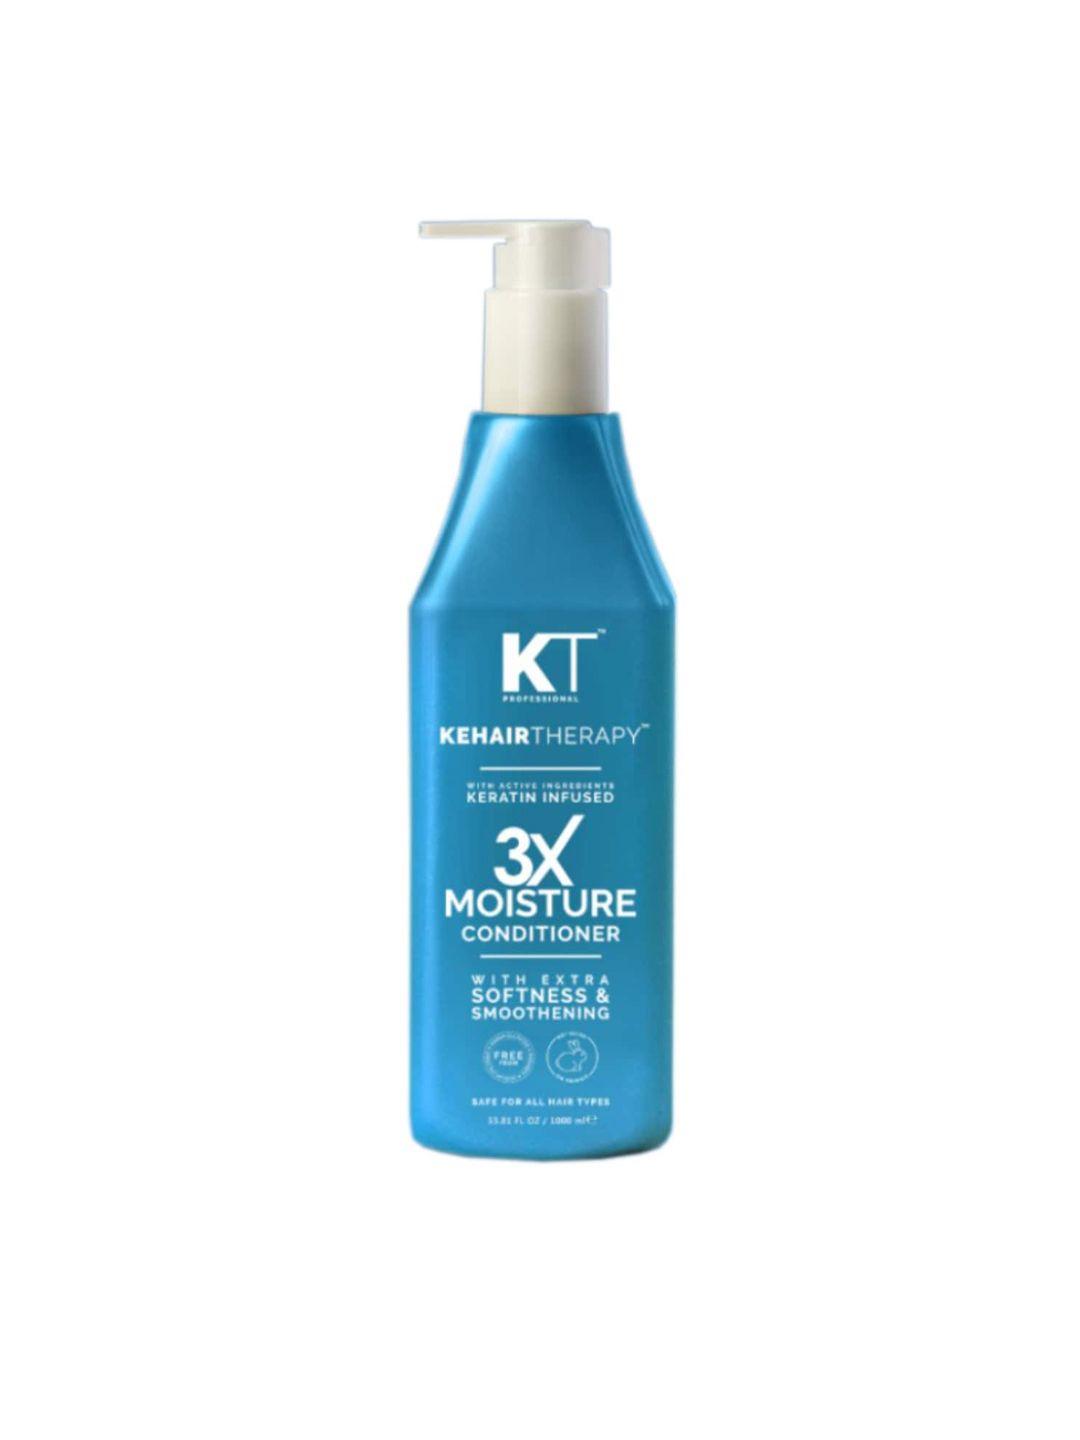 KEHAIRTHERAPY Keratin Infused 3X Moisture Hair Conditioner With Extra Softness - 1000 ml